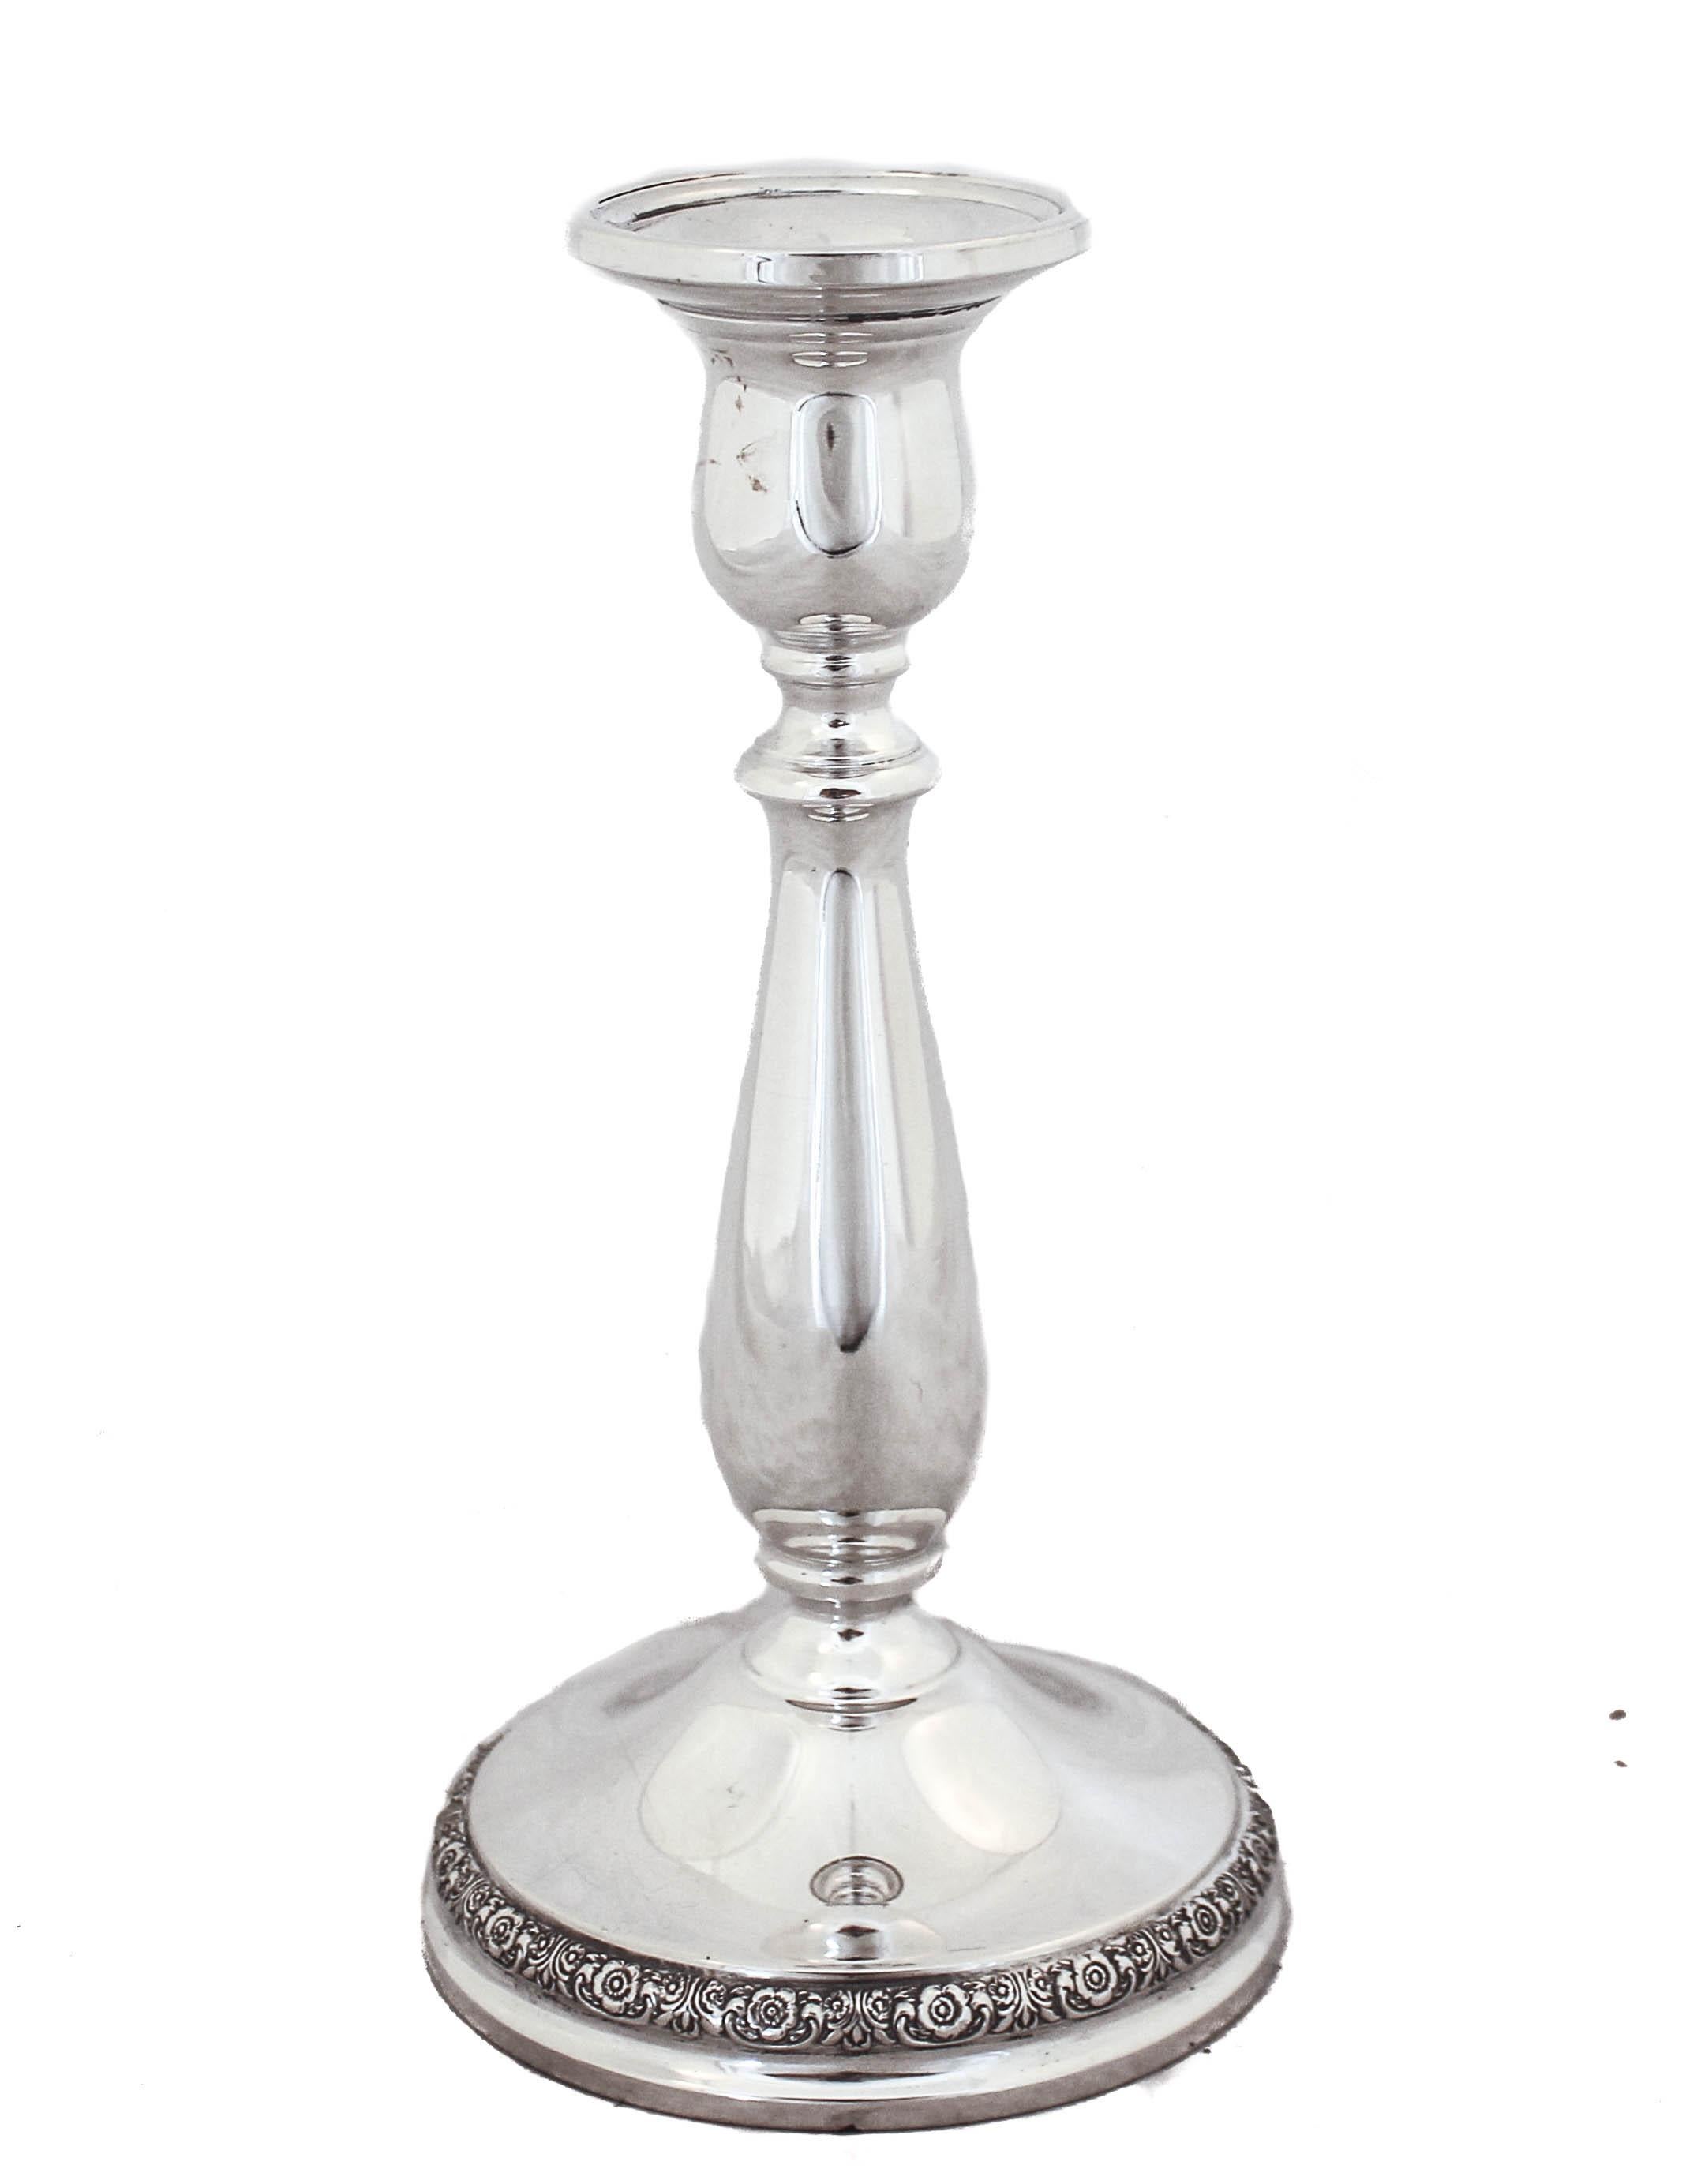 These sterling silver candlesticks are being offered. They are made by International Silver and are from 1939. They have a floral motif around the base the rest is clean and simple. These beauties can fit in any decor and are timeless!